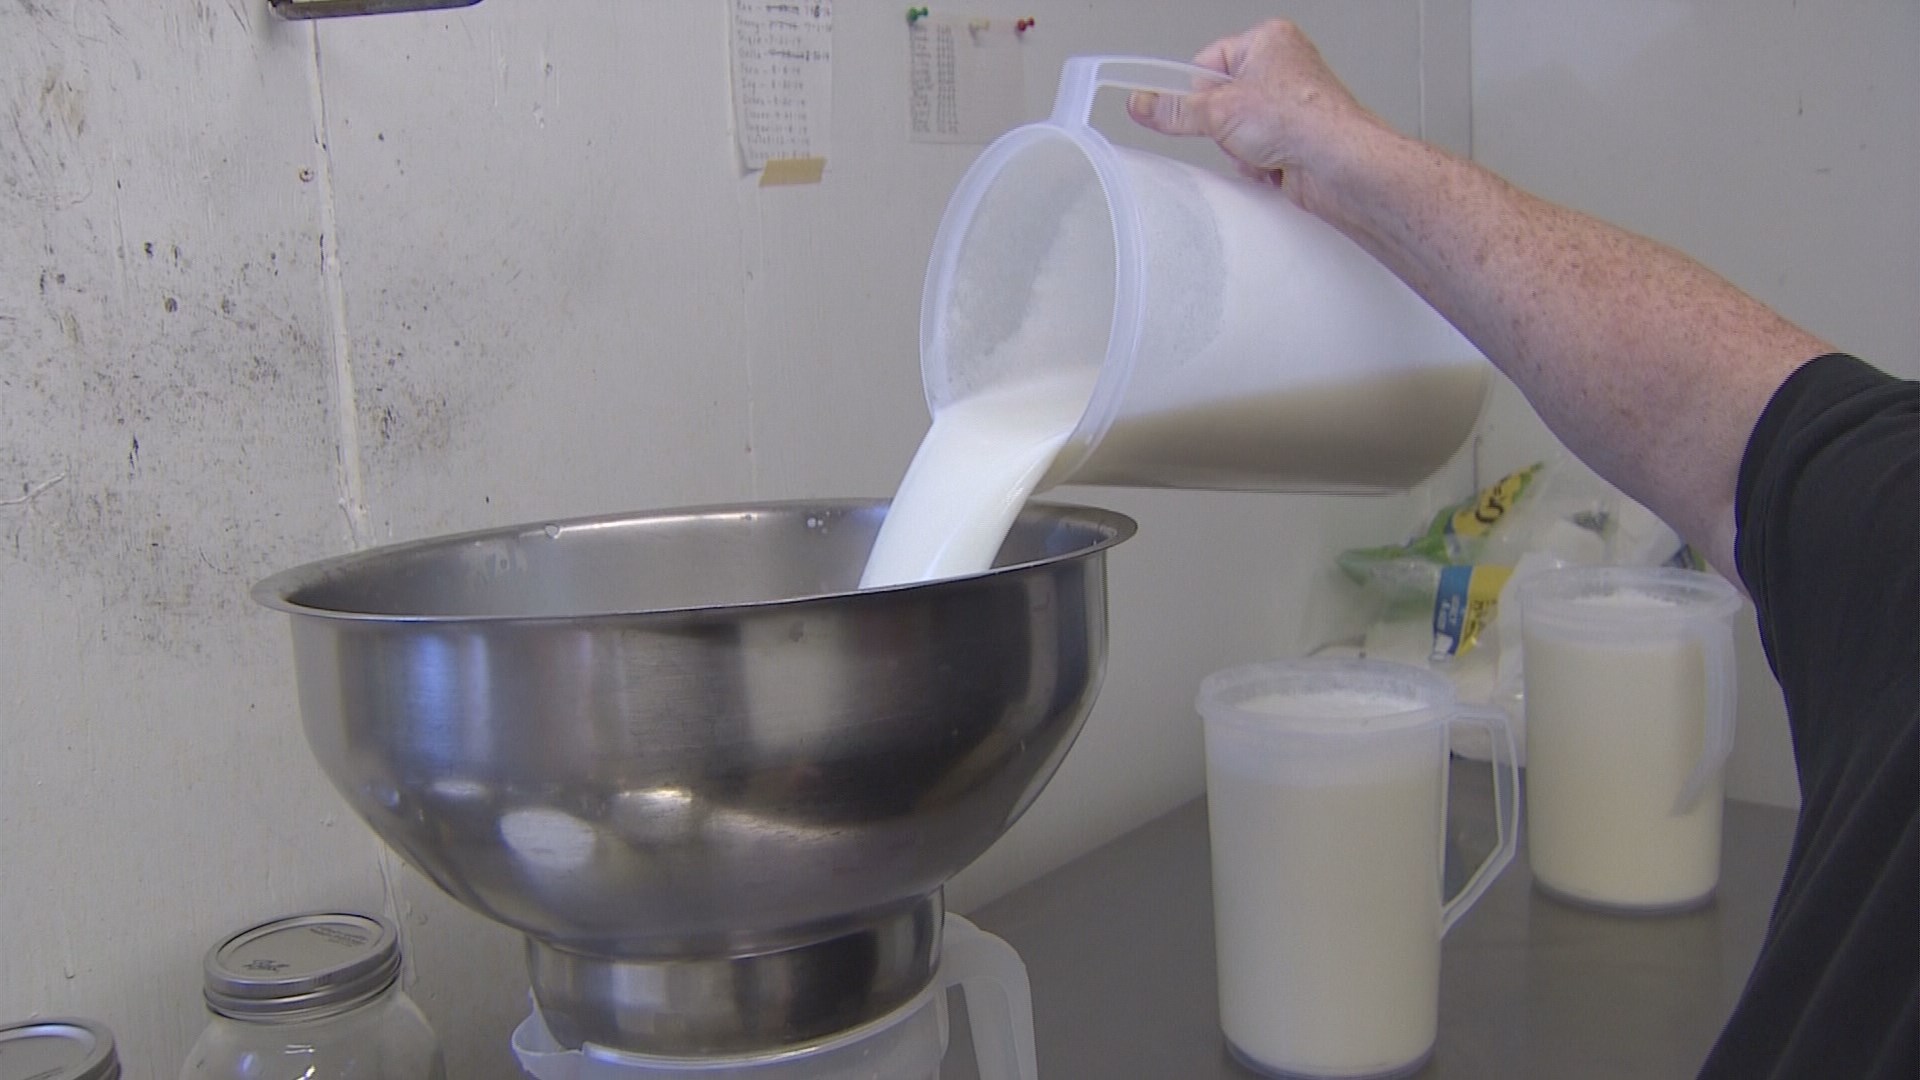 Health or Hype: The raw milk trend